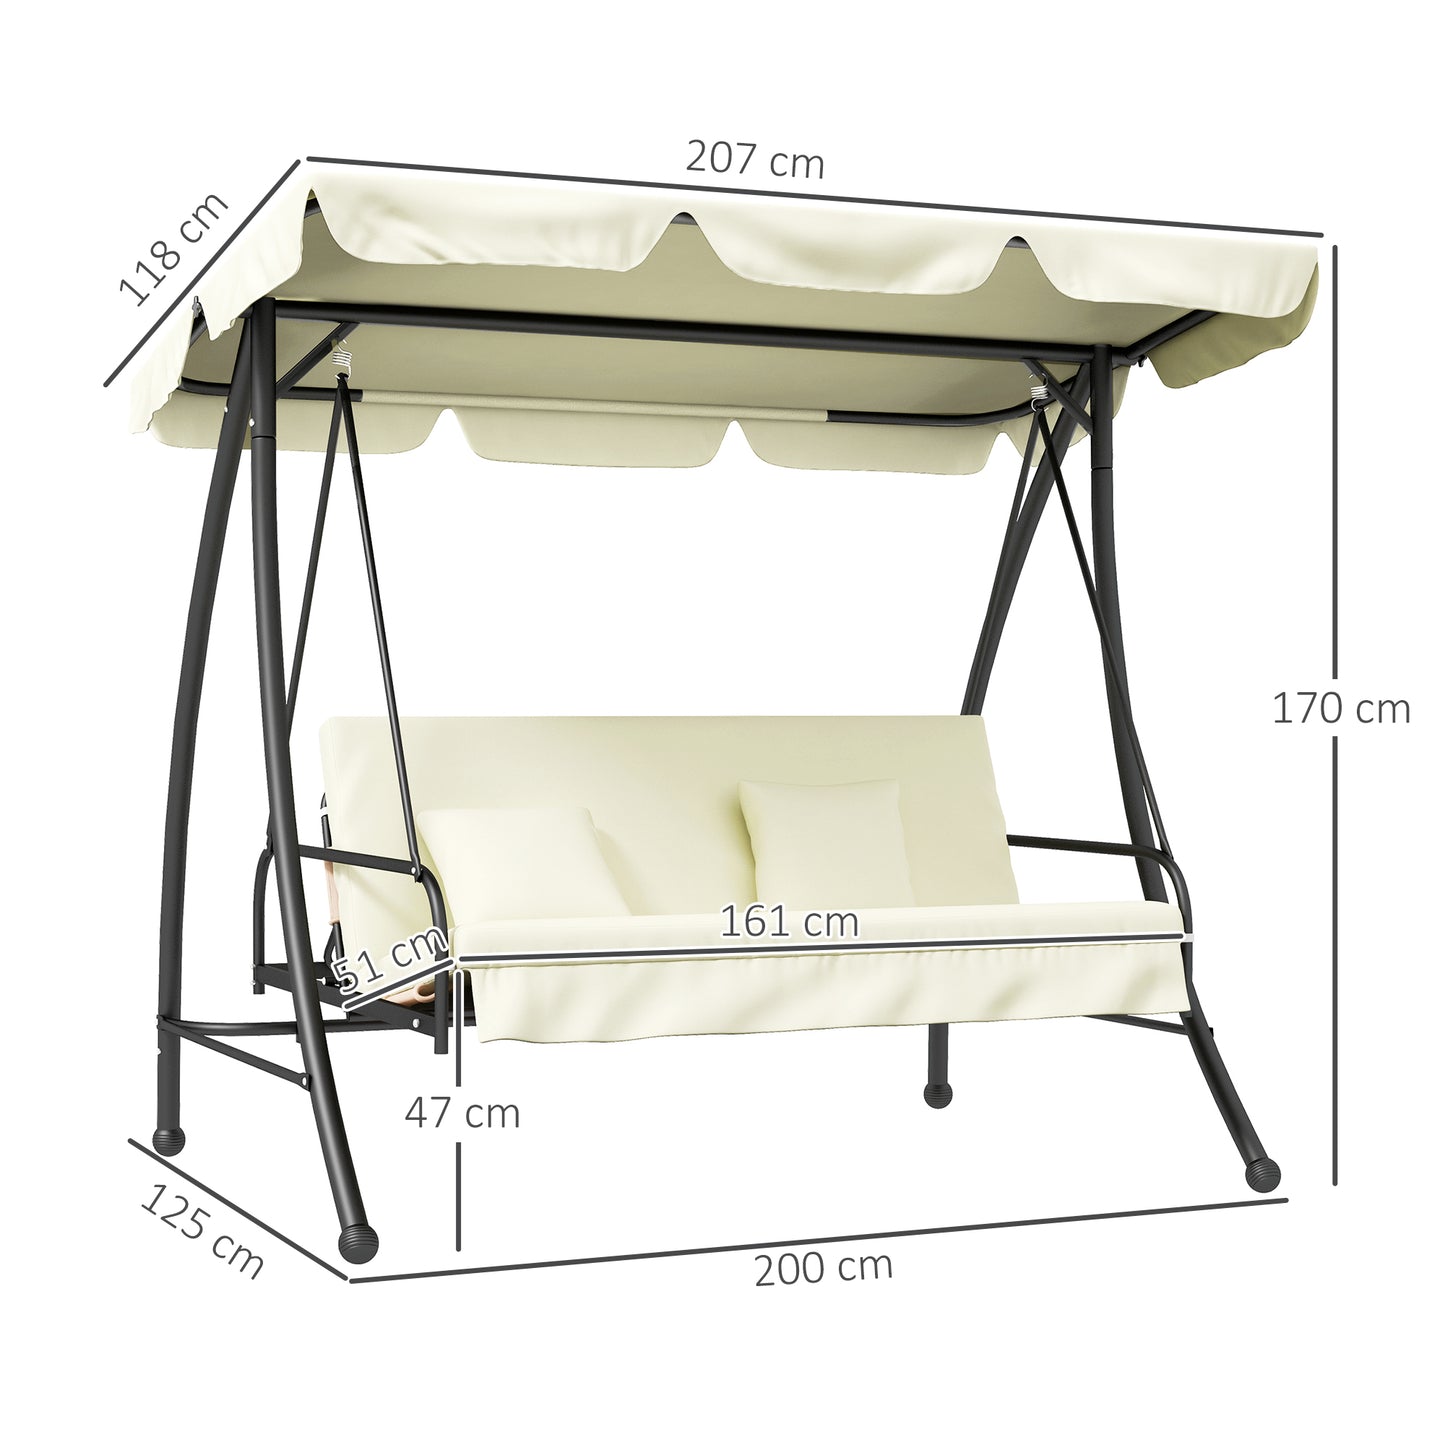 Outsunny 3 Seater Garden Swing Chair with Tilting Canopy - Cream White